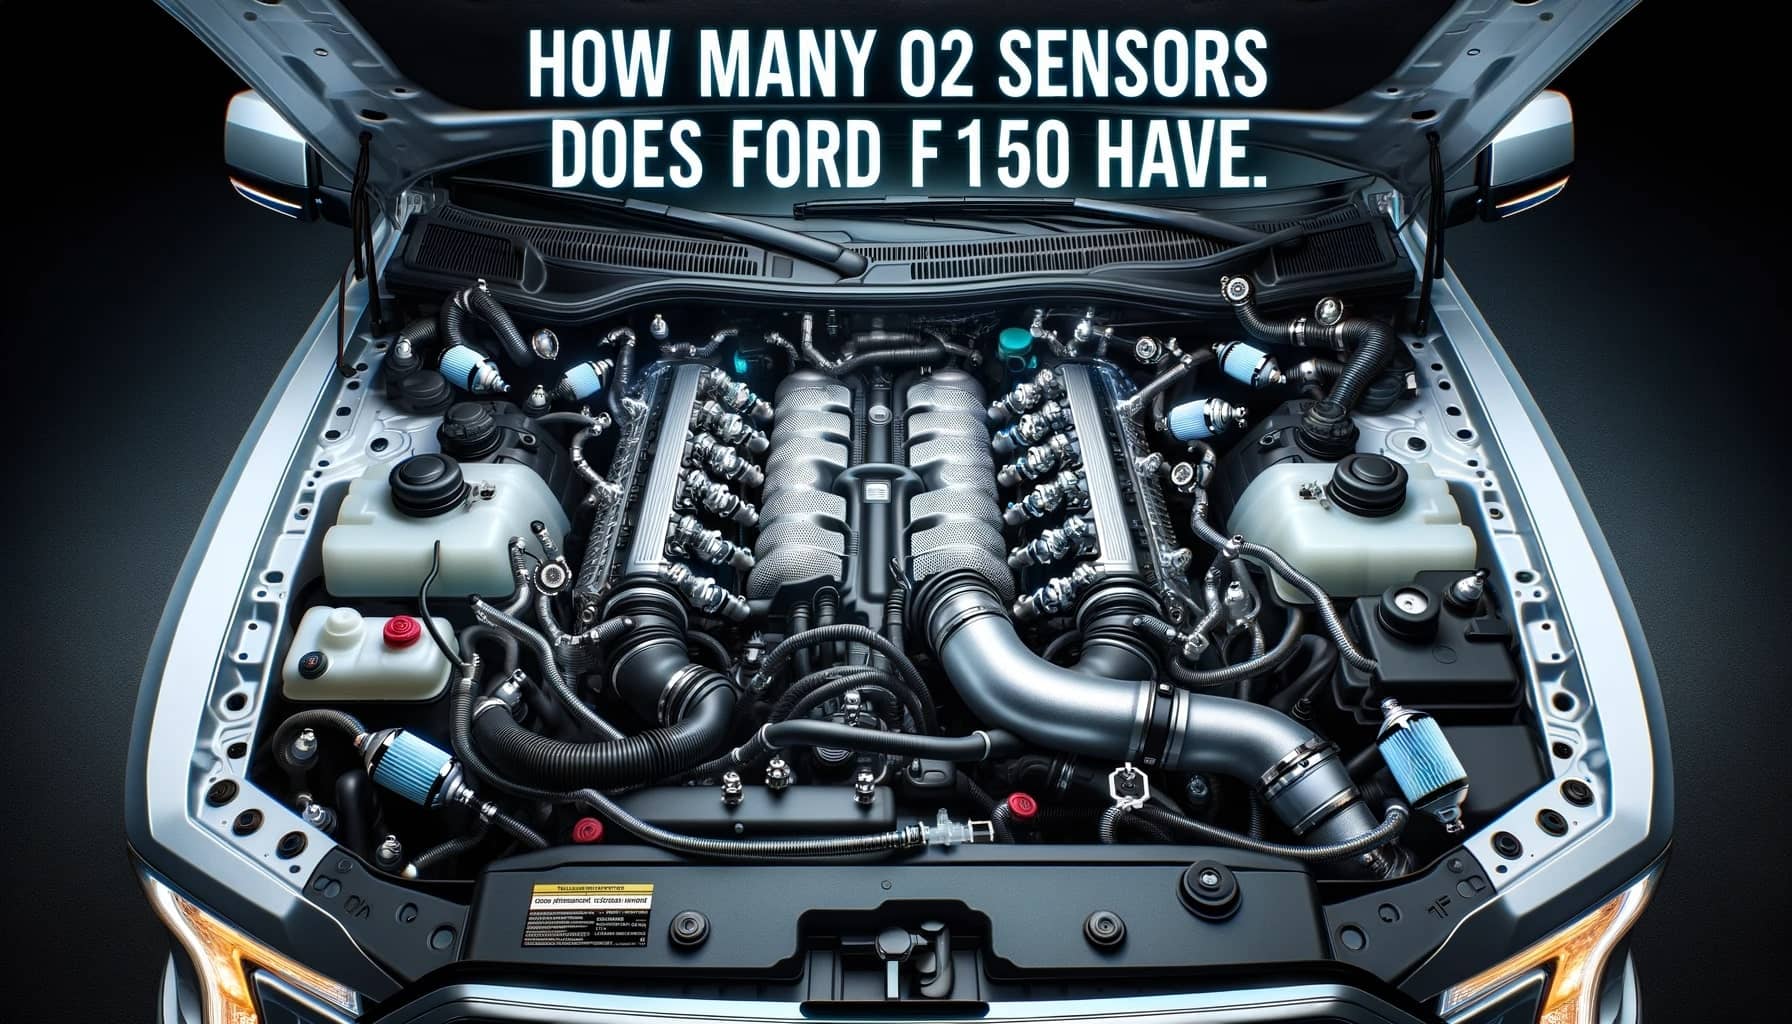 How Many O2 Sensors Does a Ford F150 Have